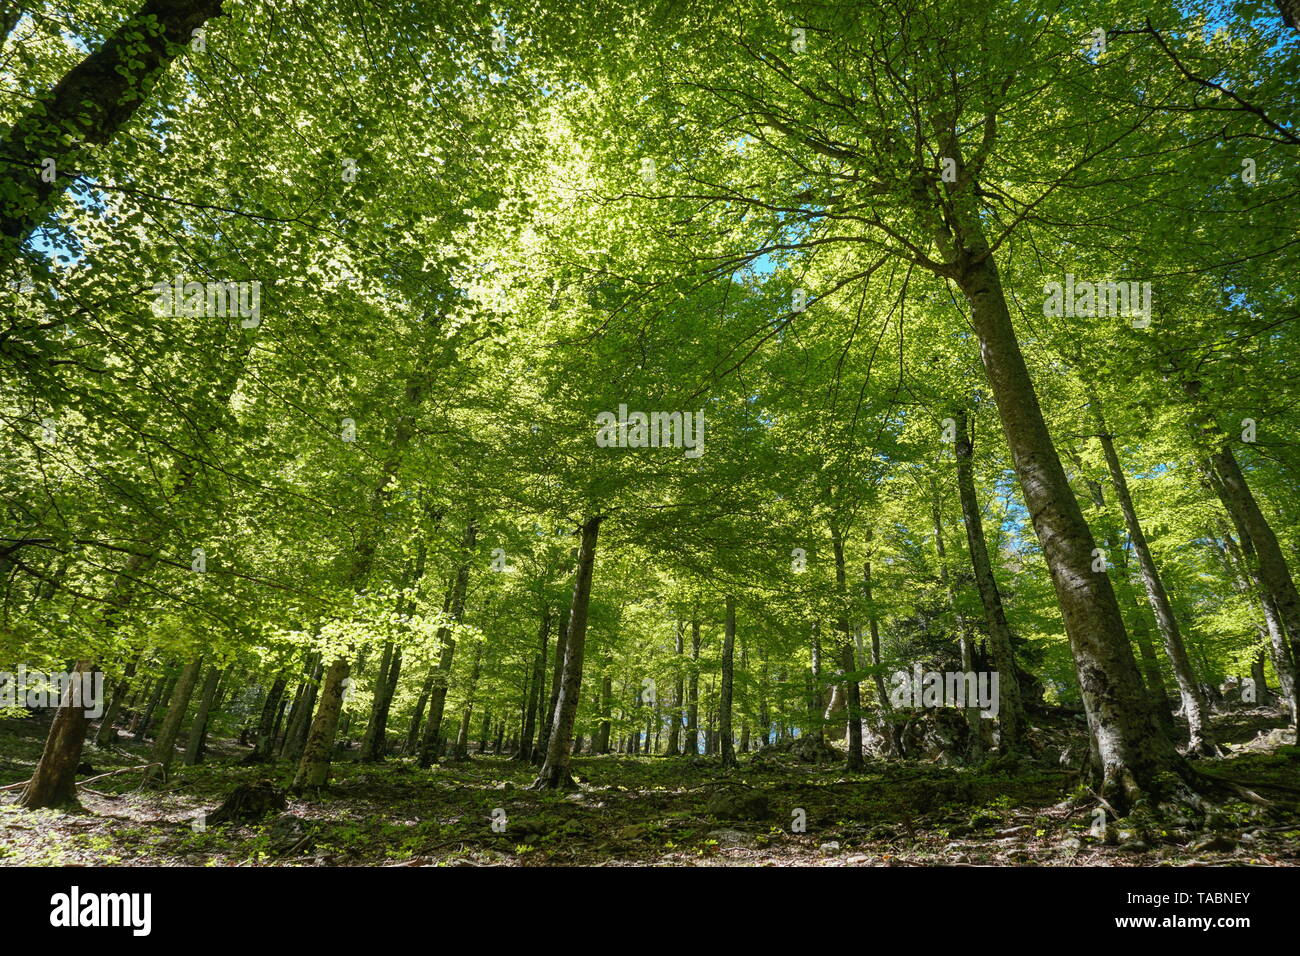 Landscape in the forest under trees foliage, France, Massif des Alberes, Pyrenees Orientales, Occitanie Stock Photo